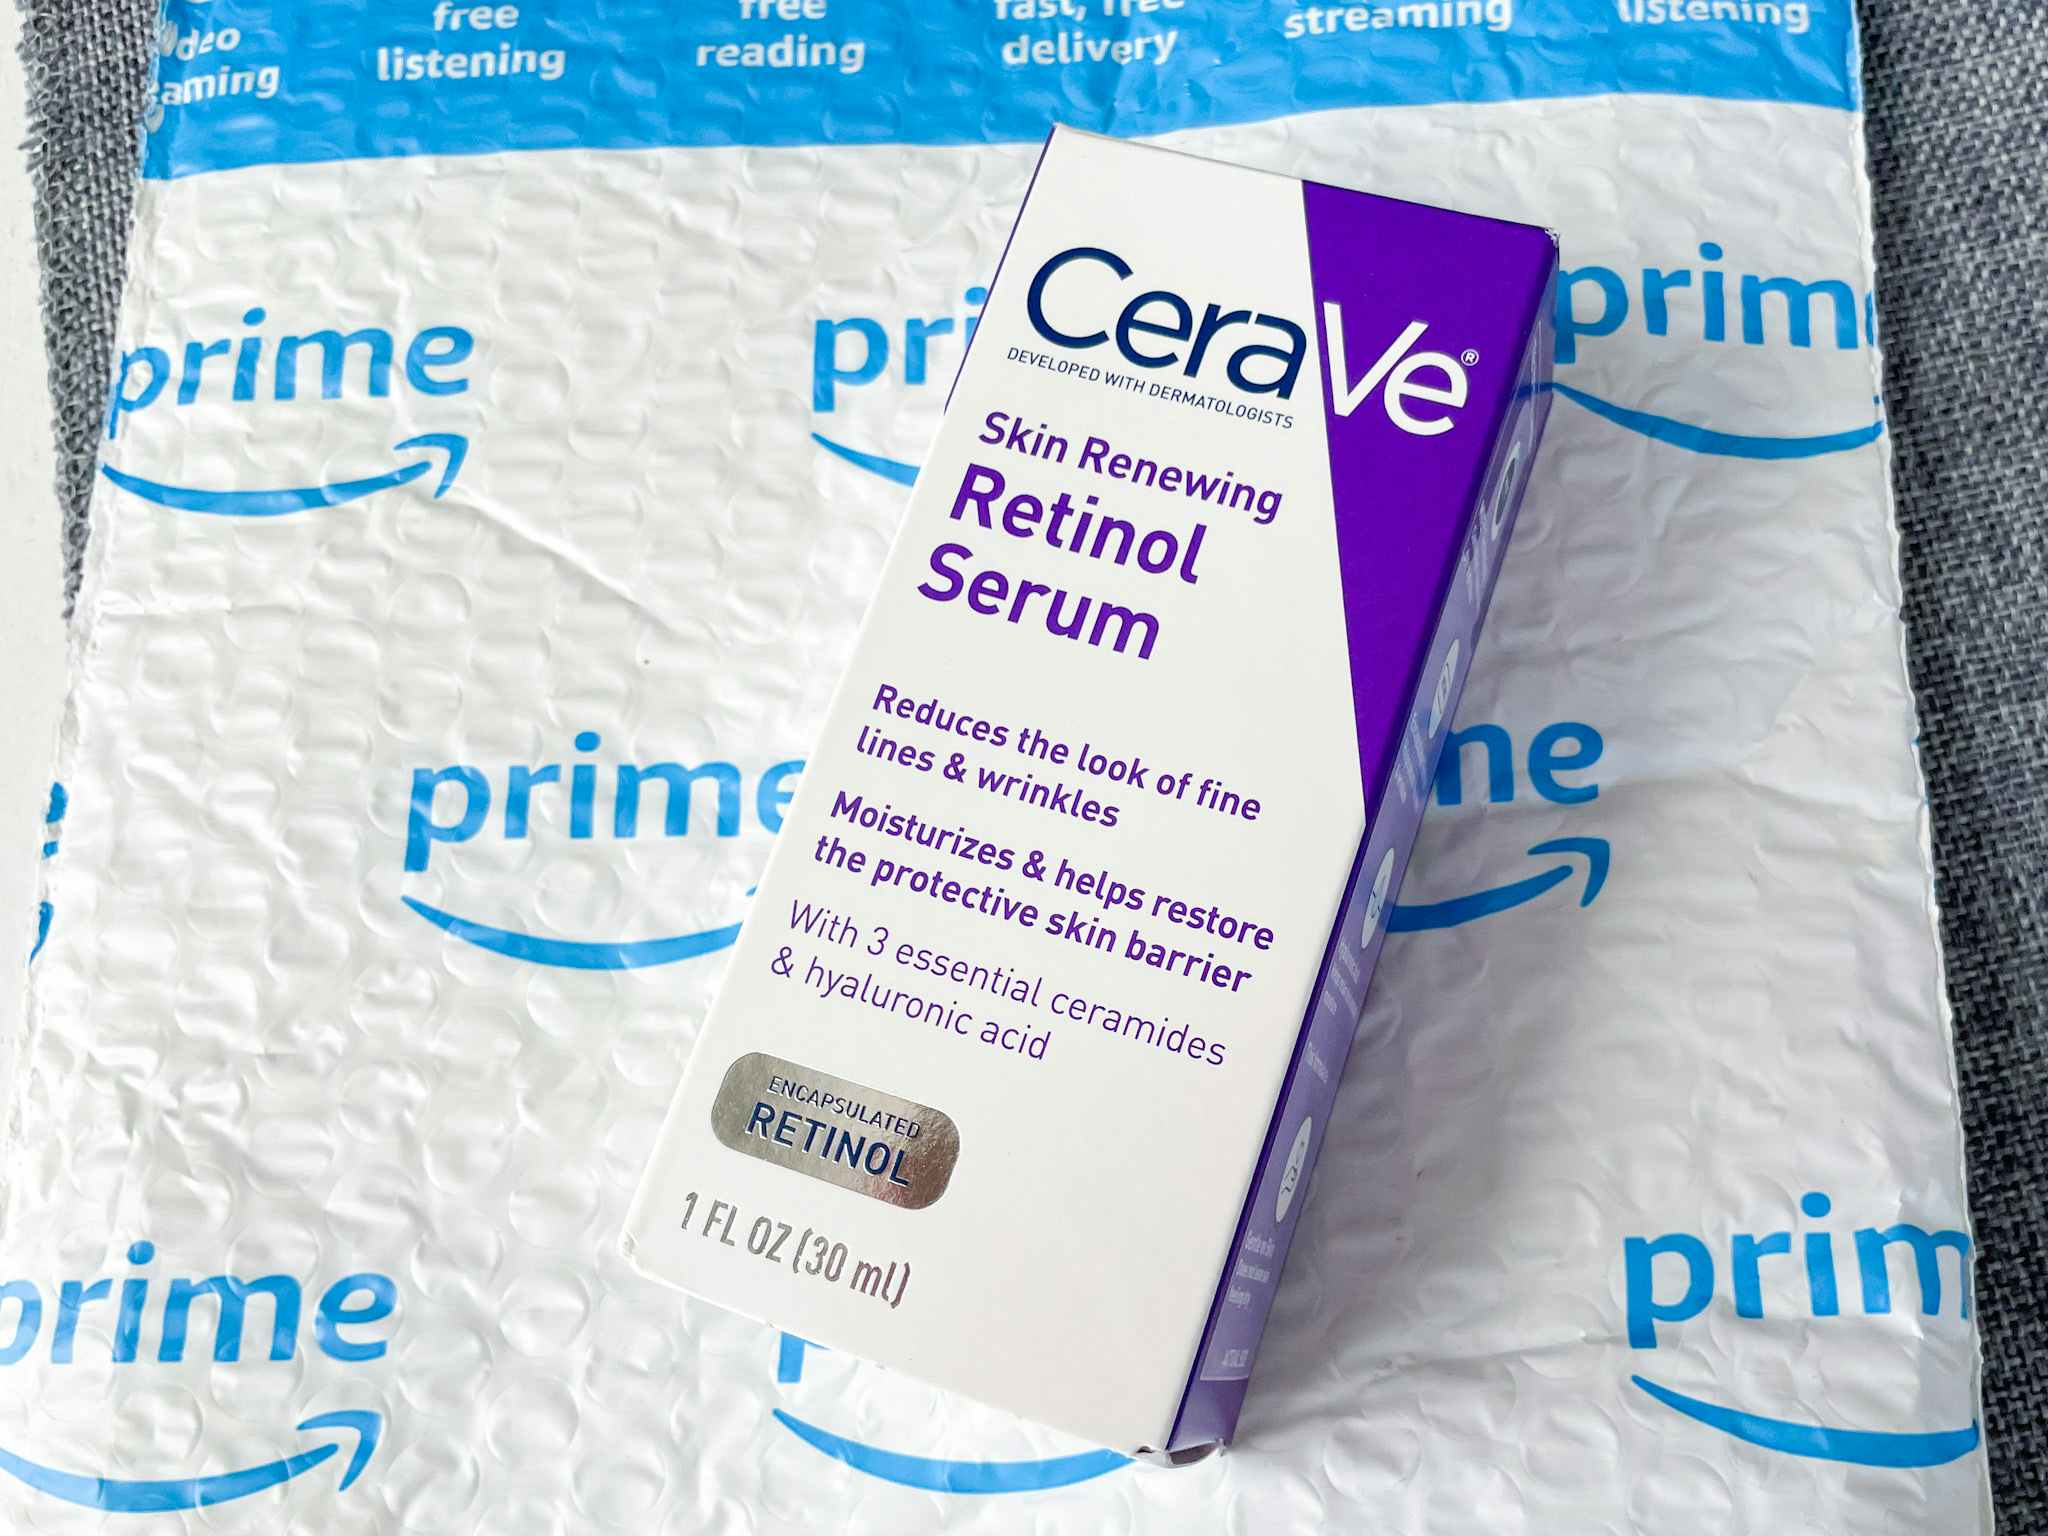 Spend $20 on Cerave Products, Get $5 Amazon Credit